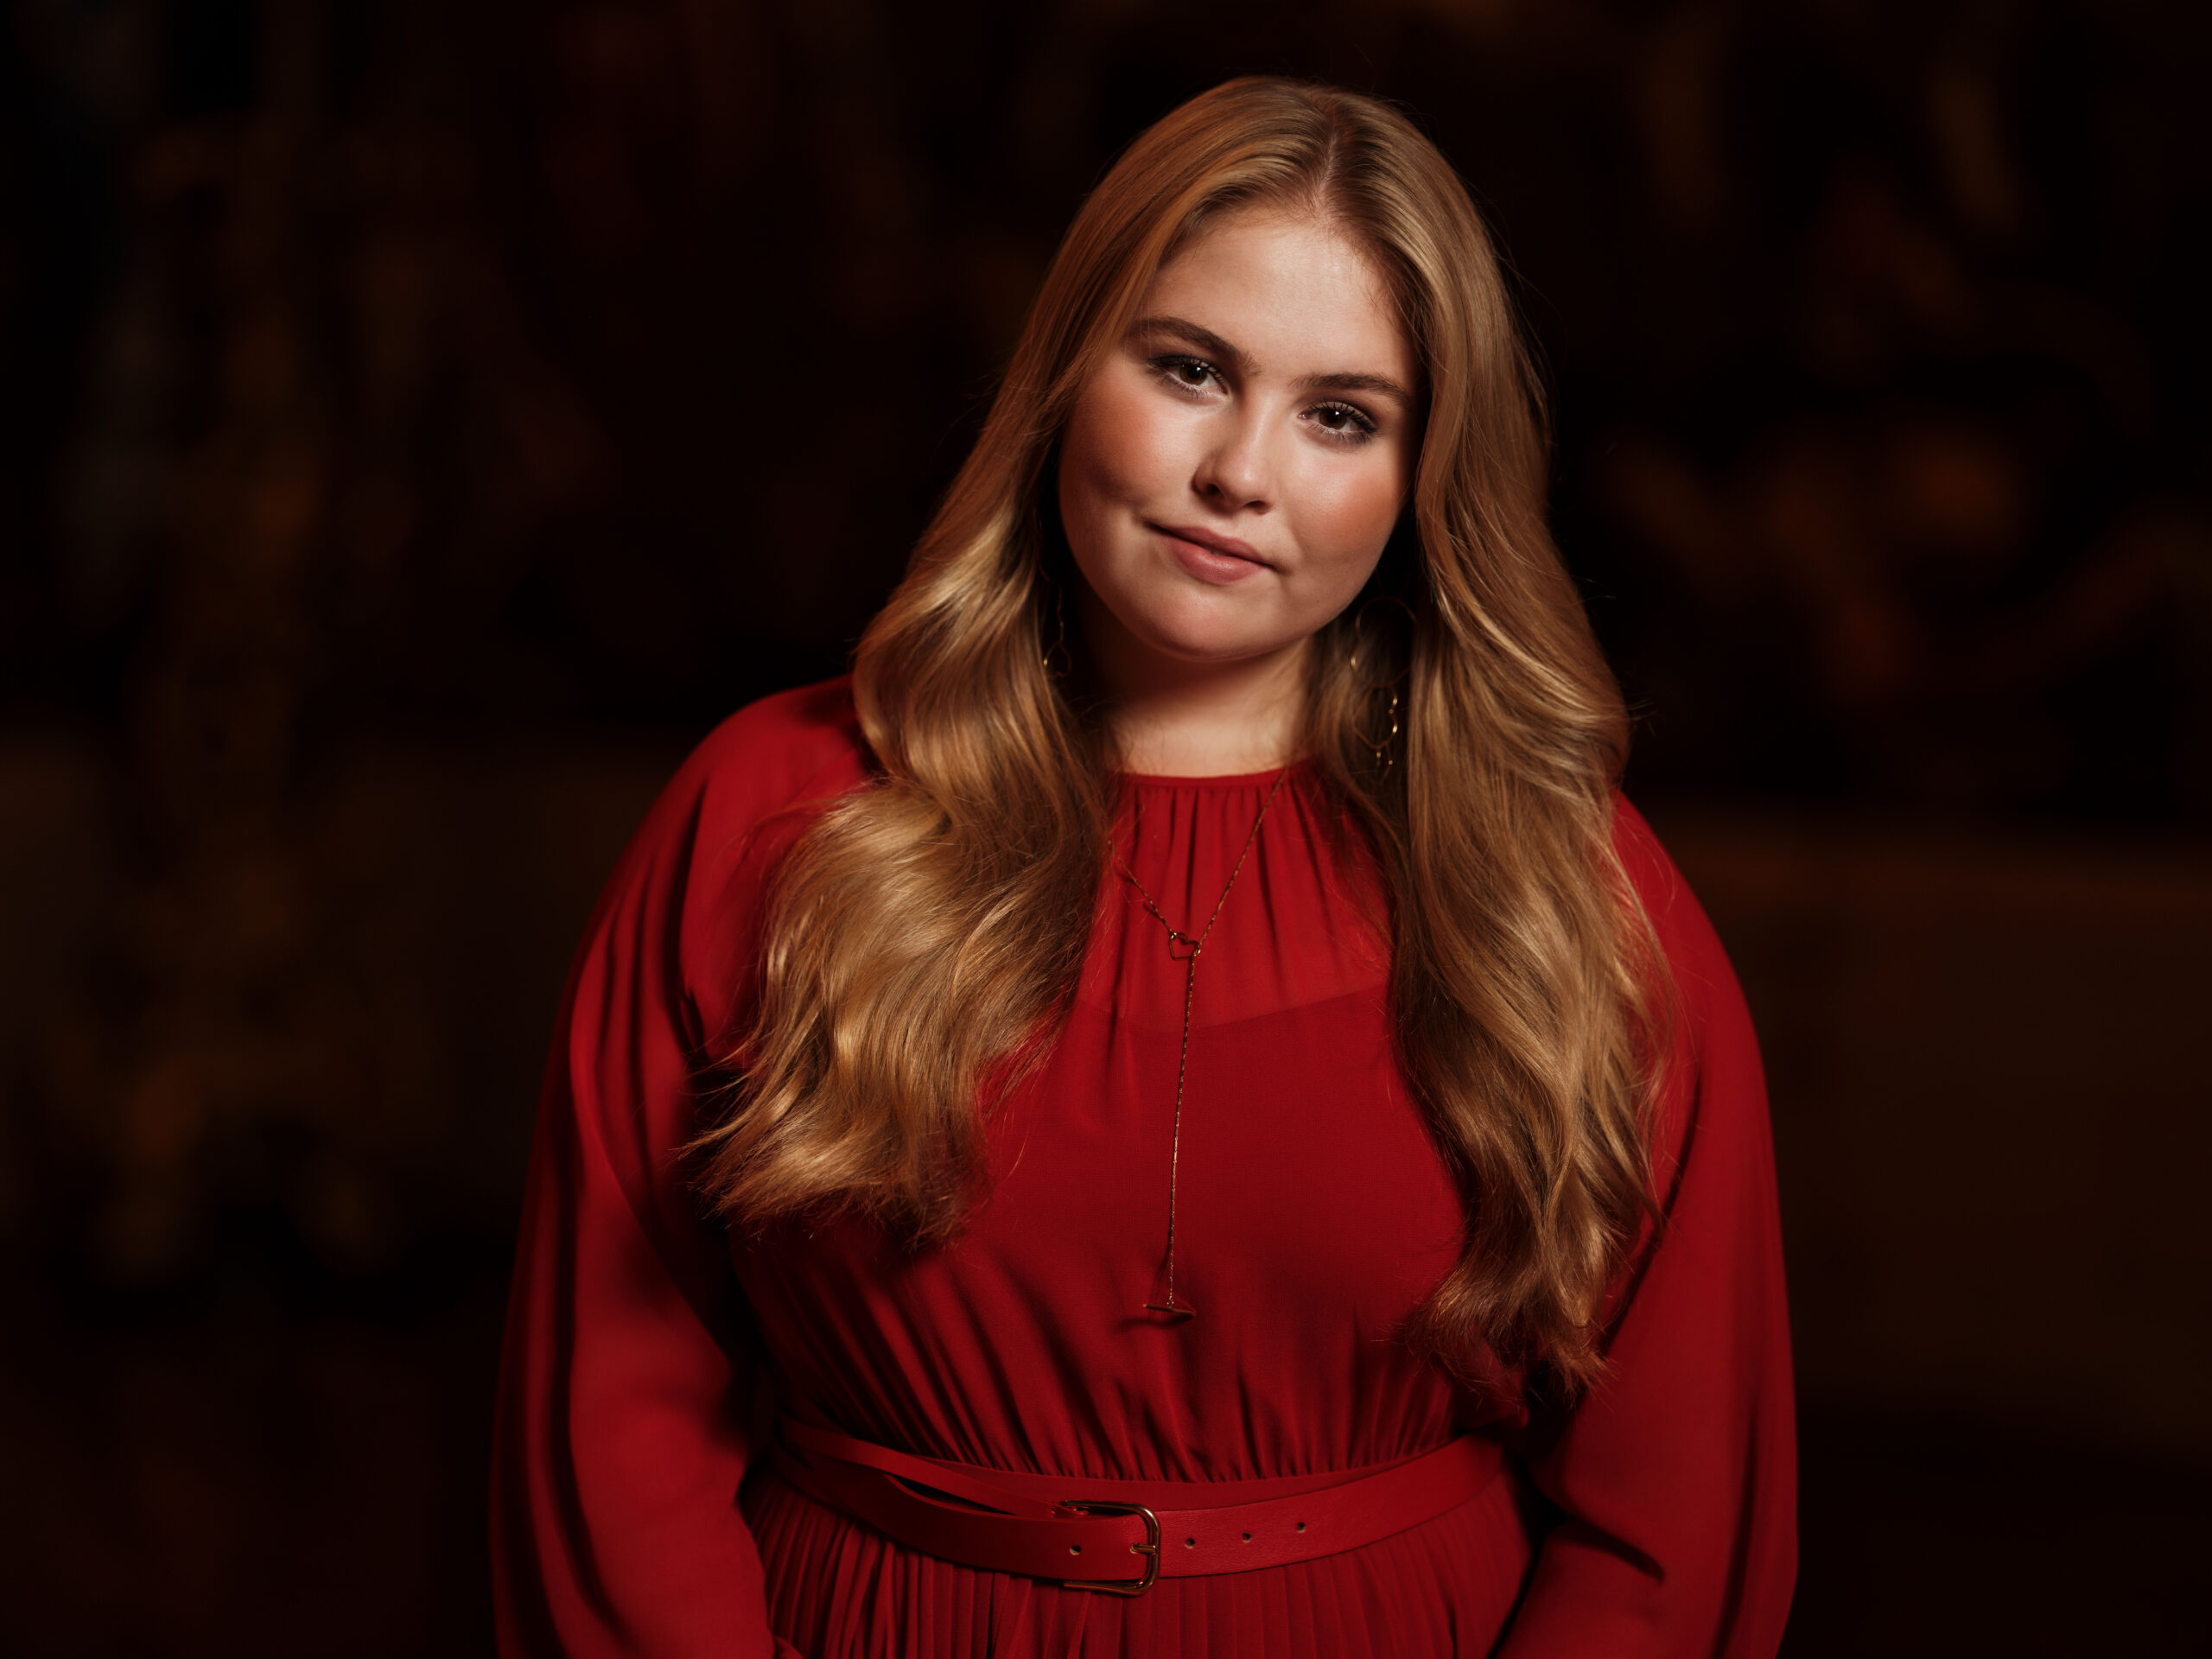 A Queen in the making - New photos for Princess Catharina-Amalia's 18th ...